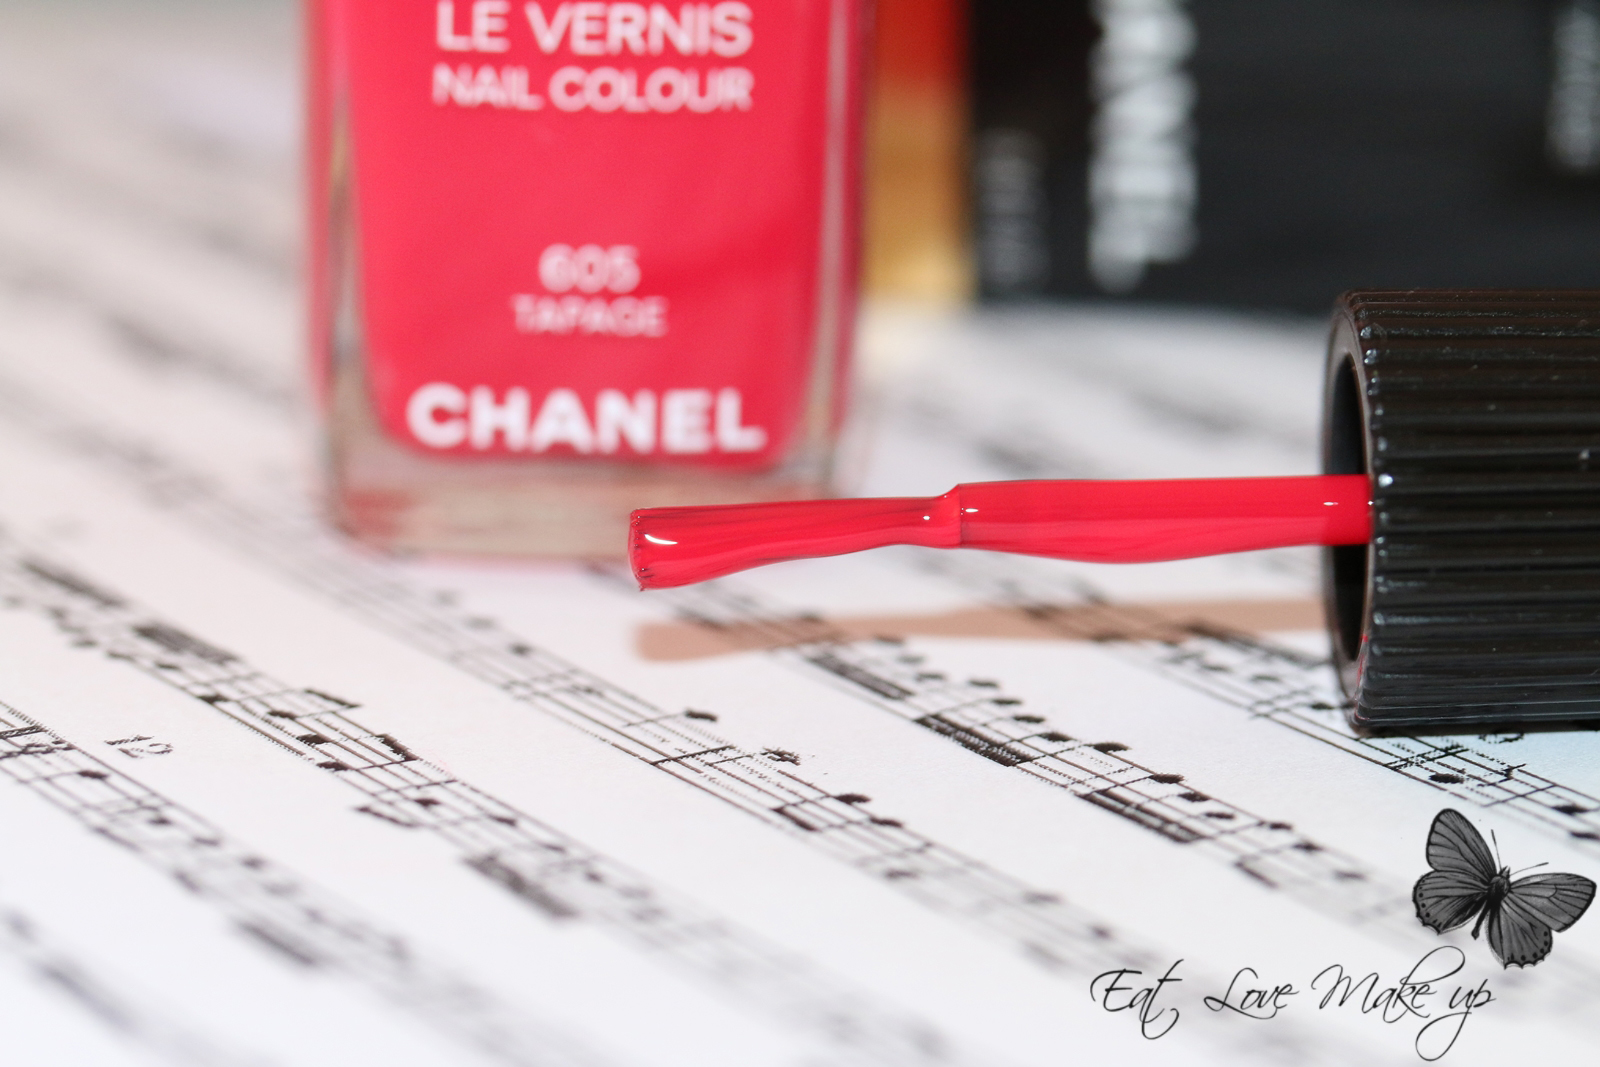 Chanel Le Vernis Nail Colour 605 Tapage